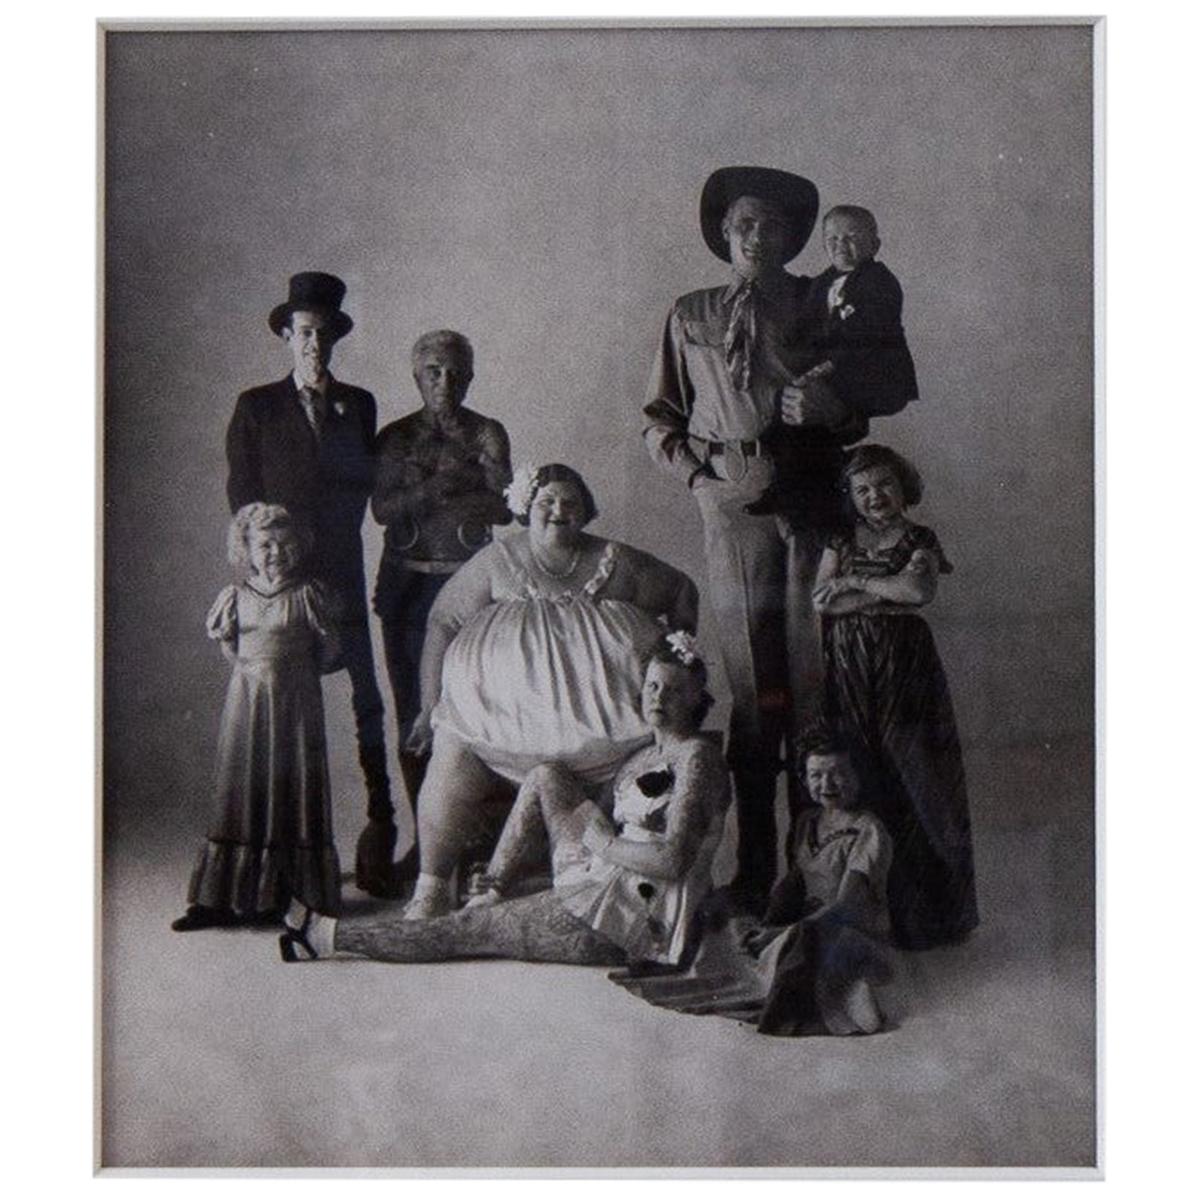 Gelatin Silver Photograph titled 'Circus People' by Irving Penn, 1947